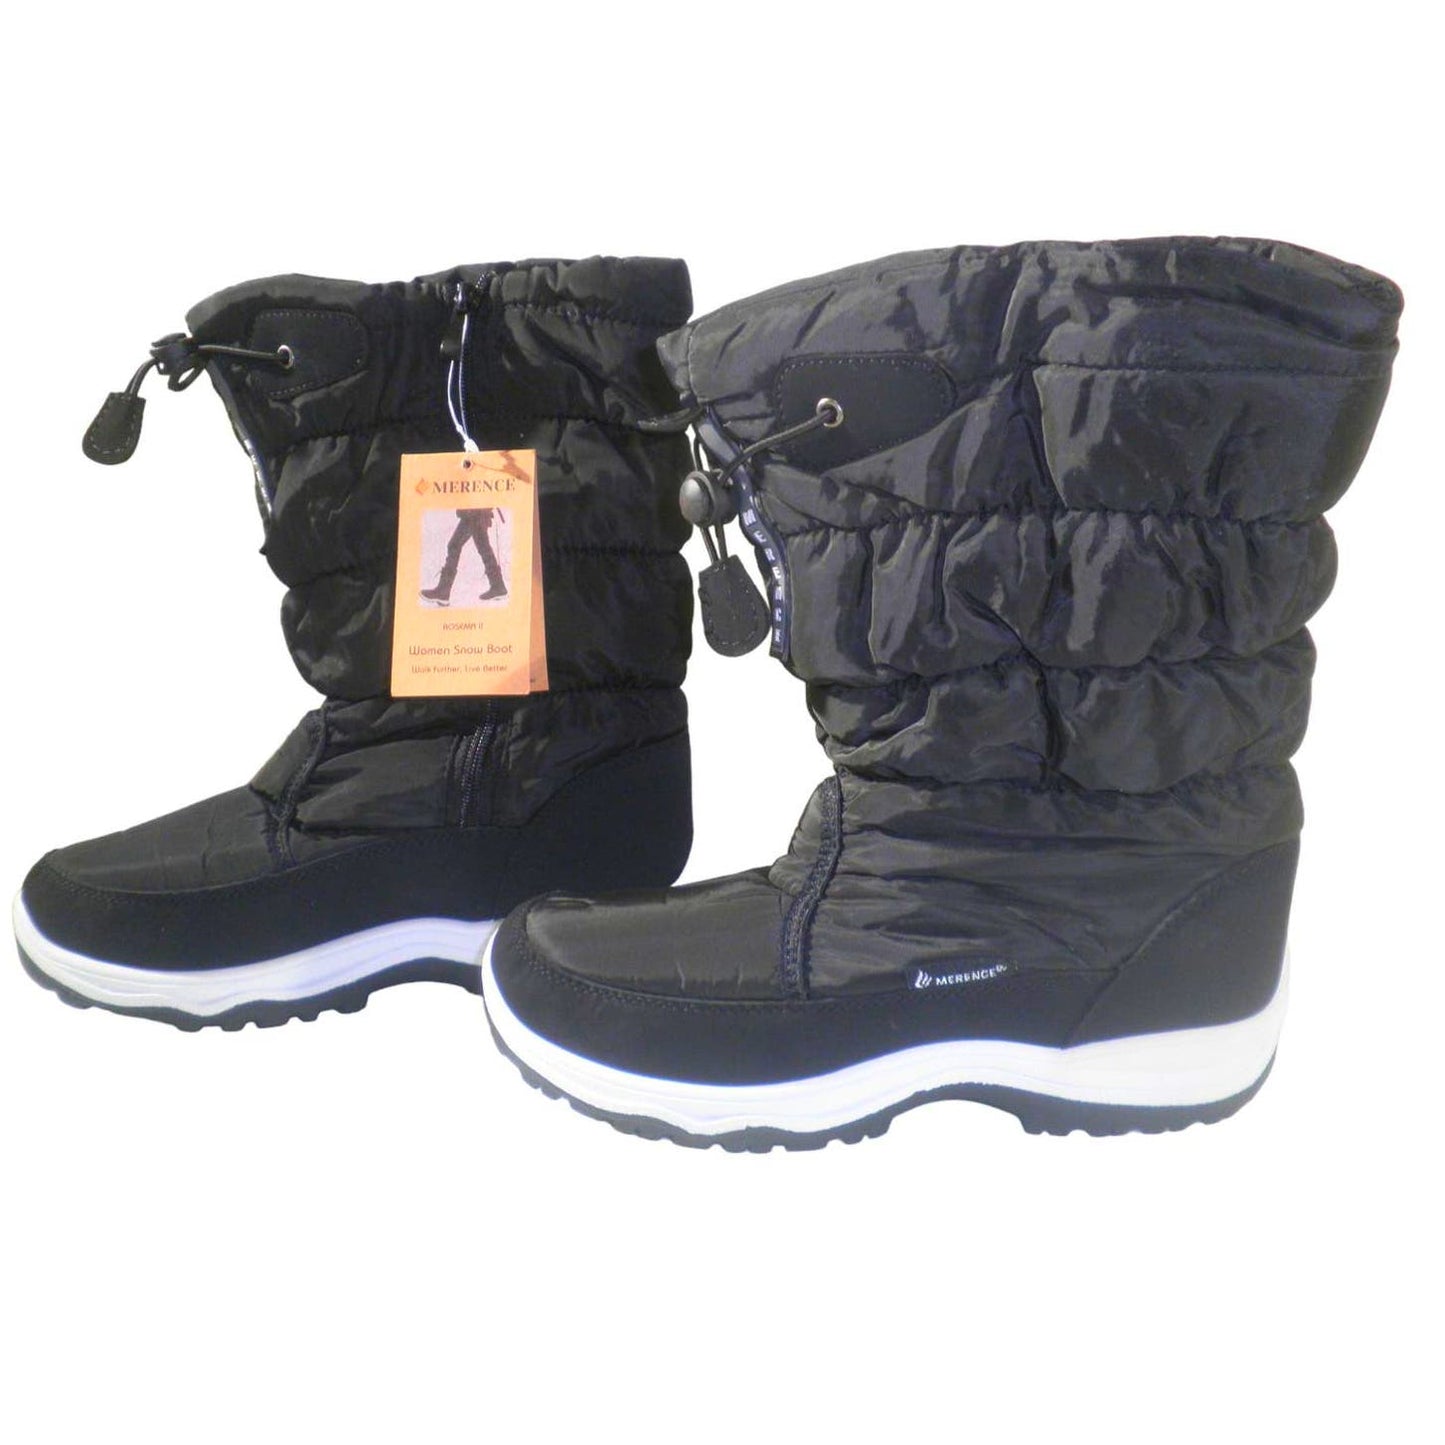 Snow Boots Winter II Water-Resistant Fur Lined Anti-Slip Boots, Black, US 10.5